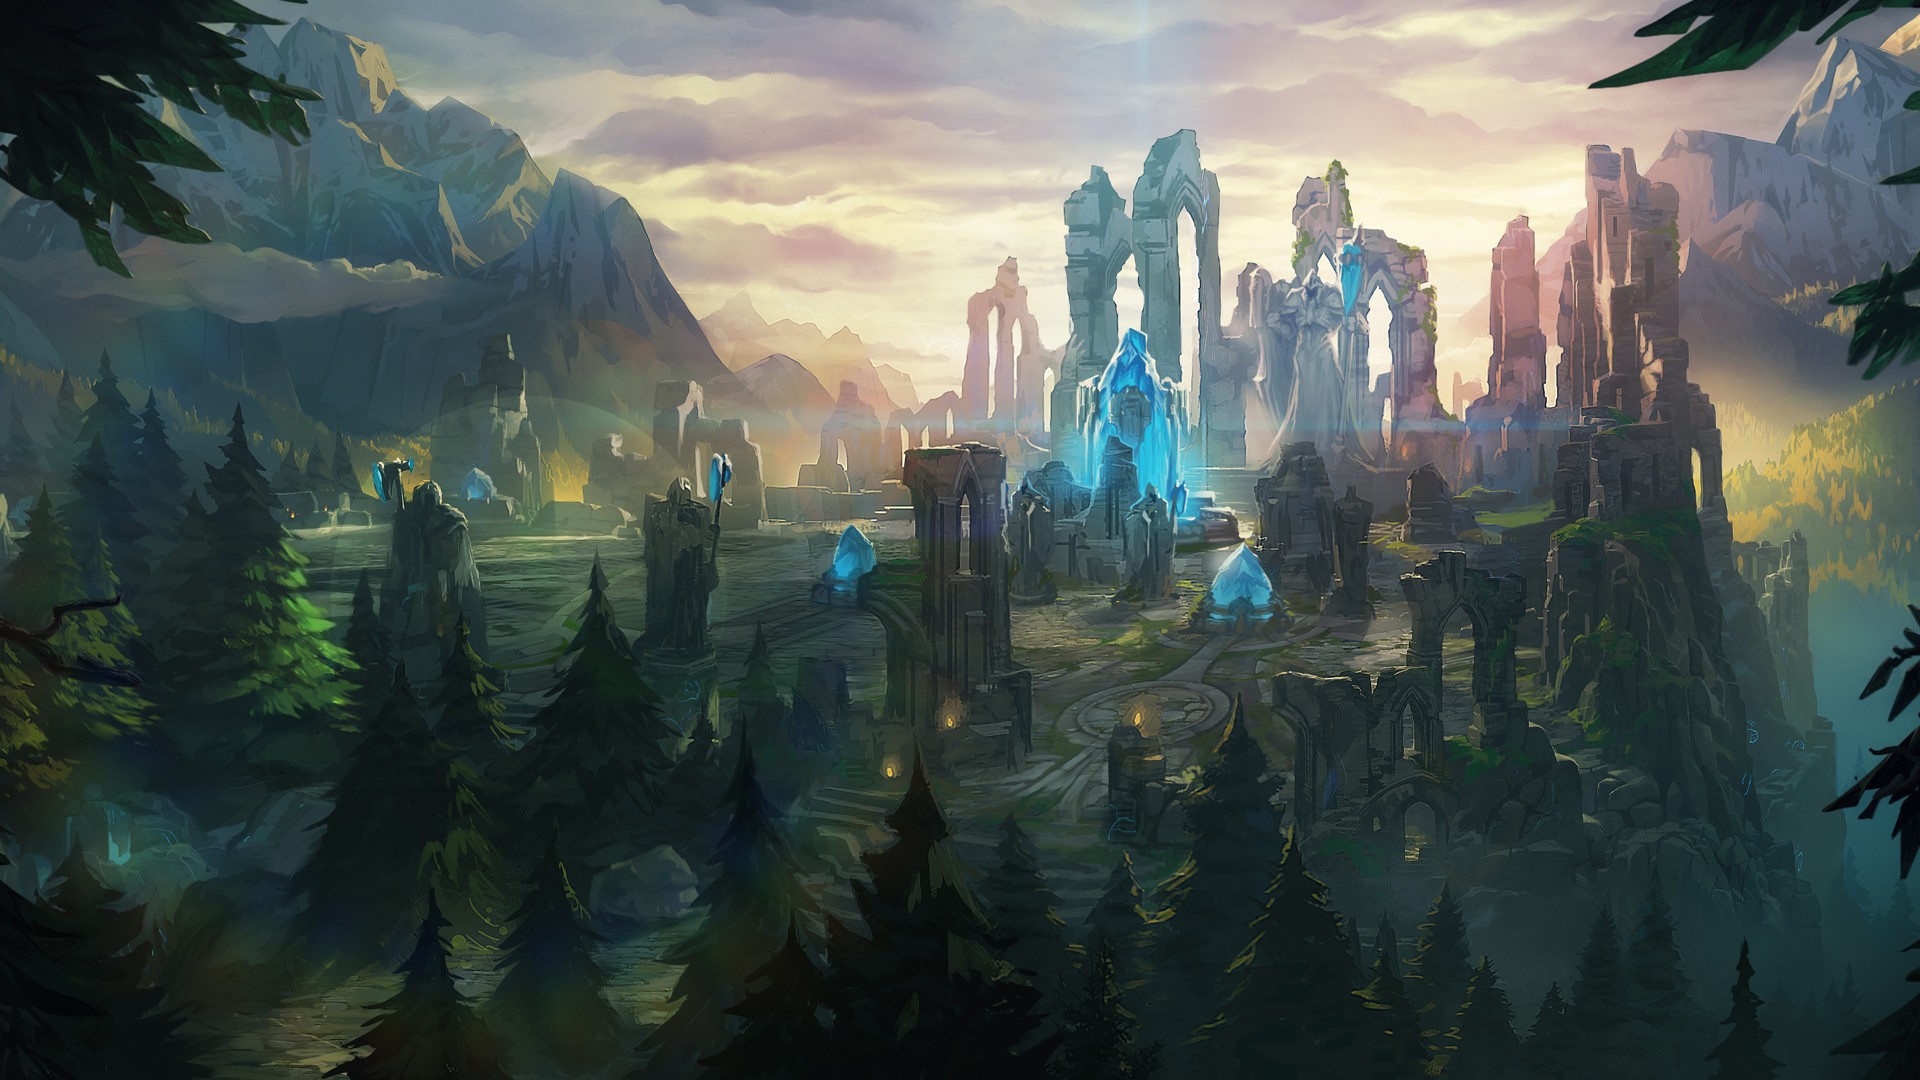 General 1920x1080 video games League of Legends fantasy art forest mountains crystal 